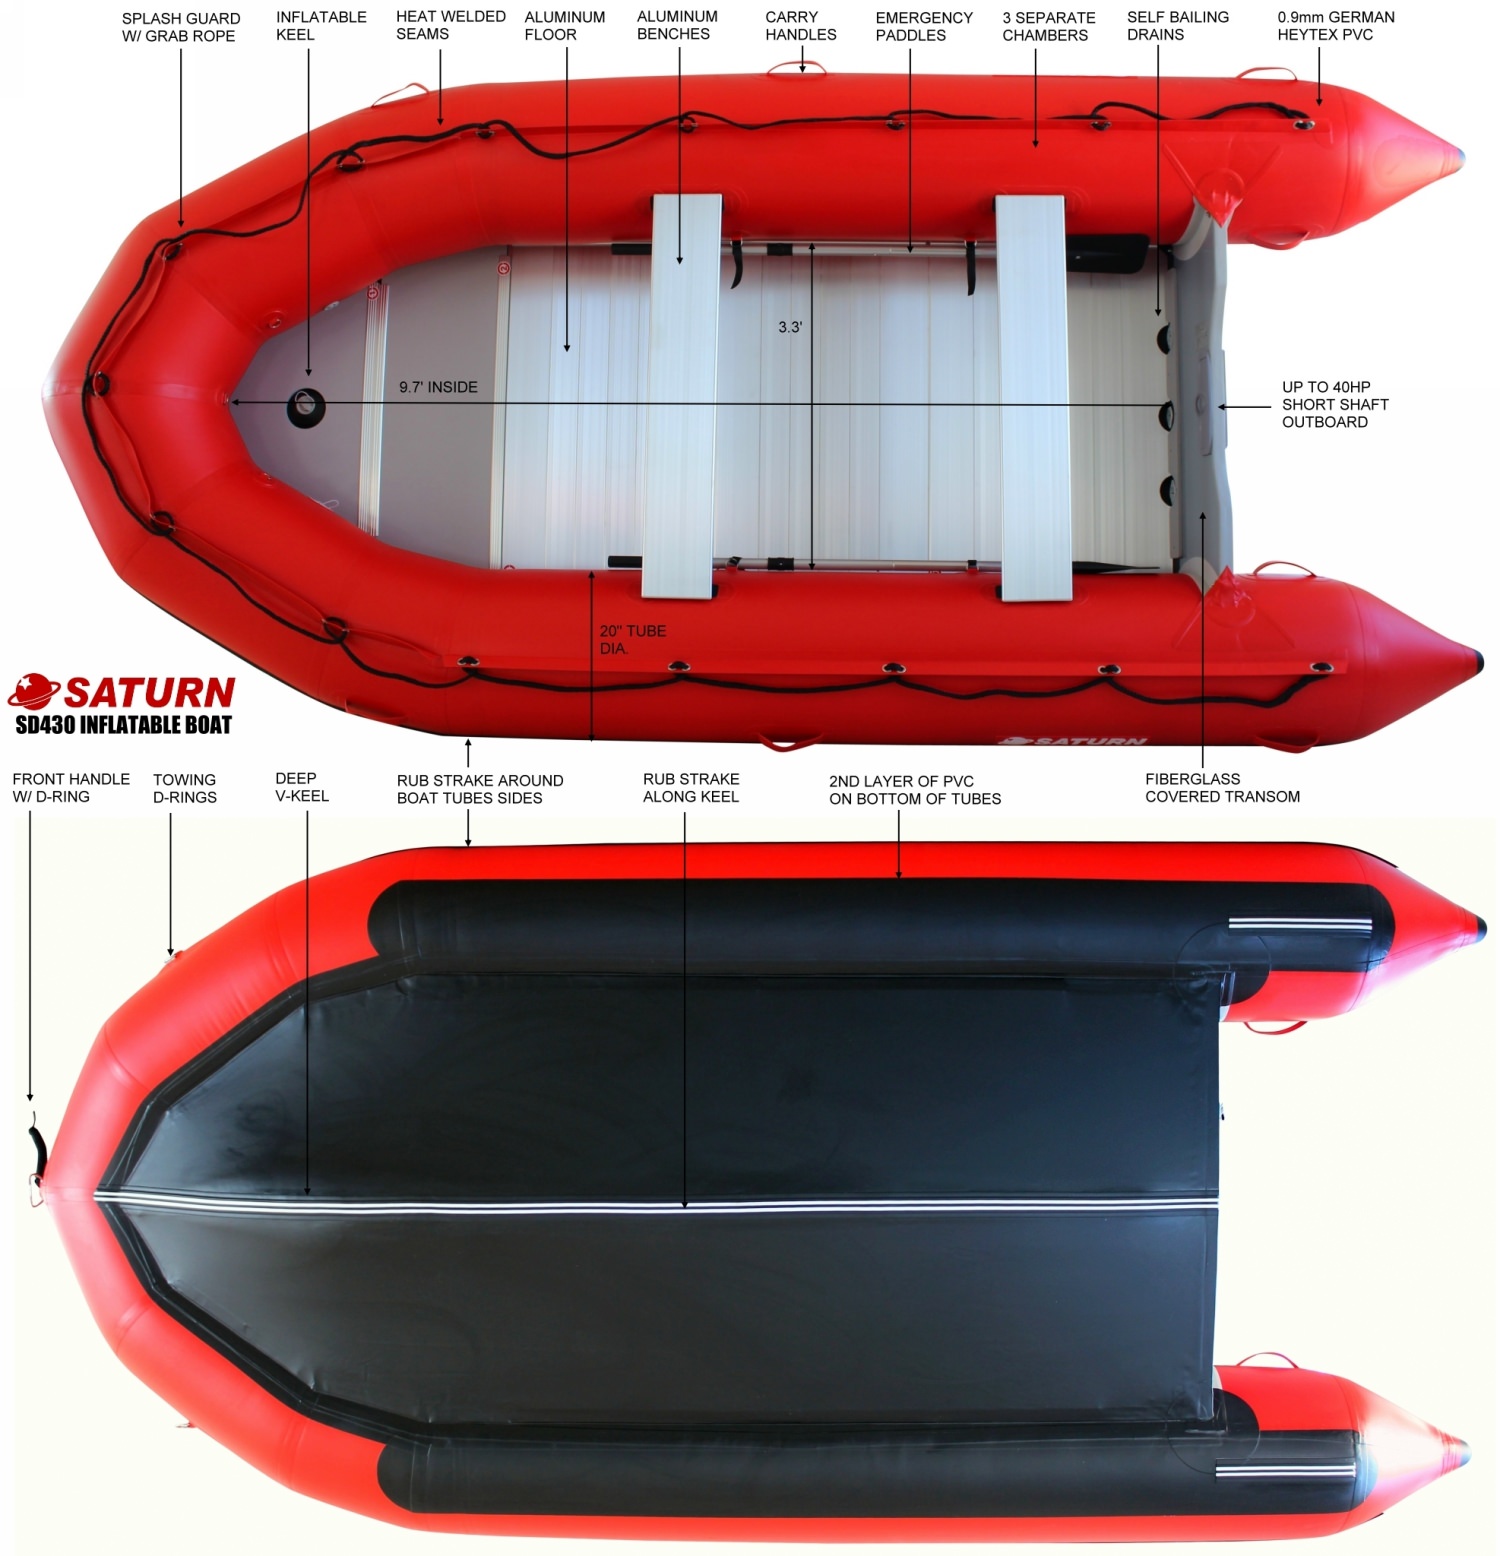 Saturn SD430 inflatable boat specifications